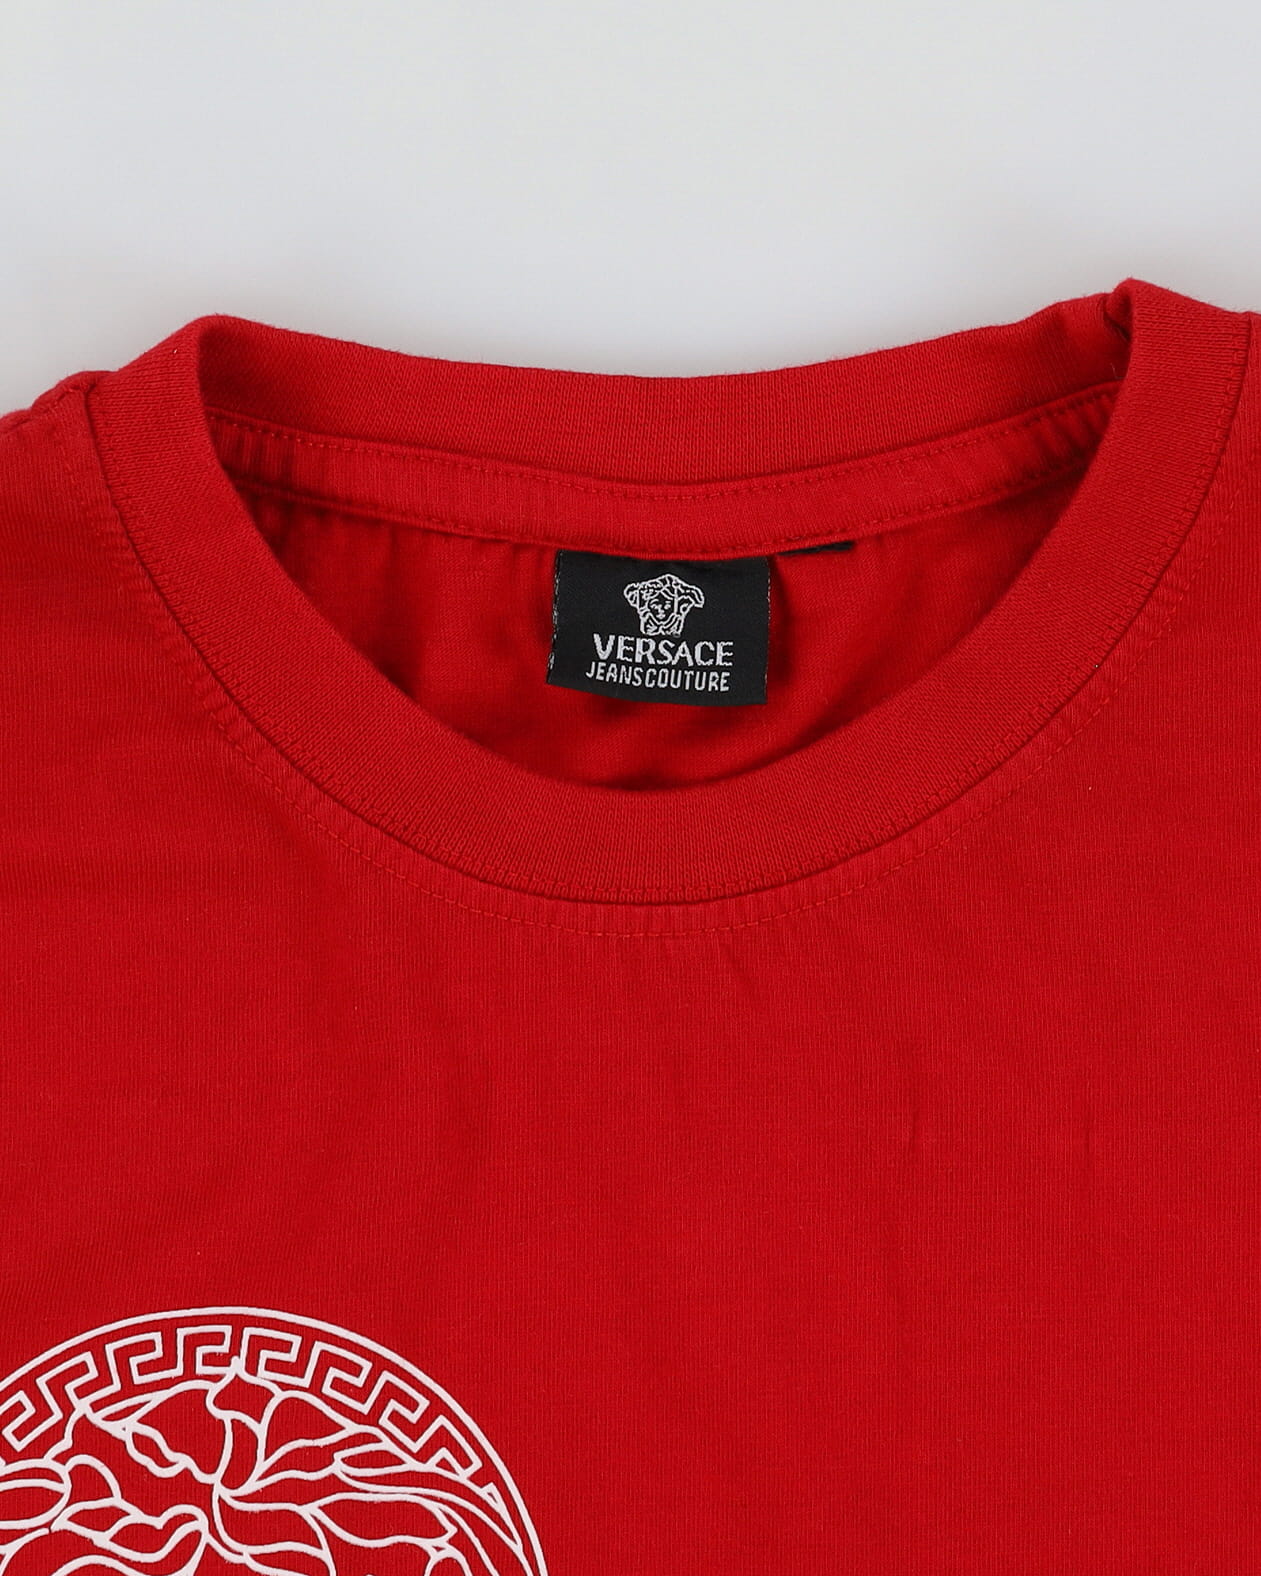 00s Versace Jeans Long Sleeve Red Embroidered T-Shirt - XS